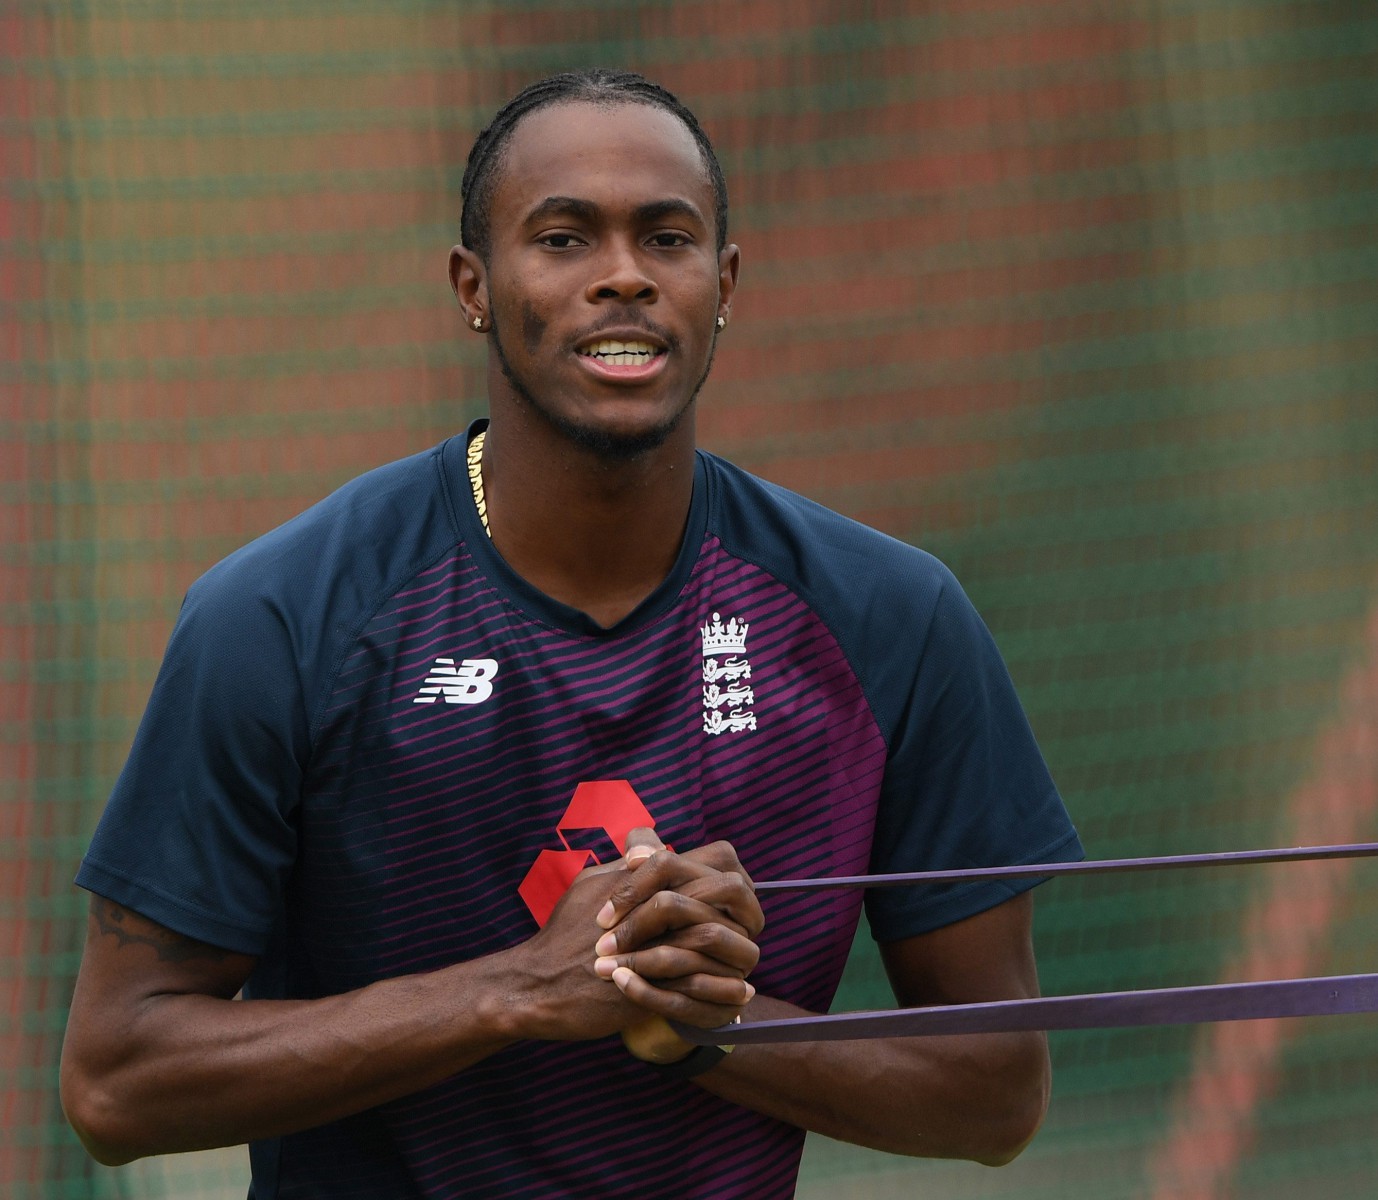 , Cricket legend Sir Garry Sobers says England star Jofra Archer is yet to prove he is a world class fast bowler